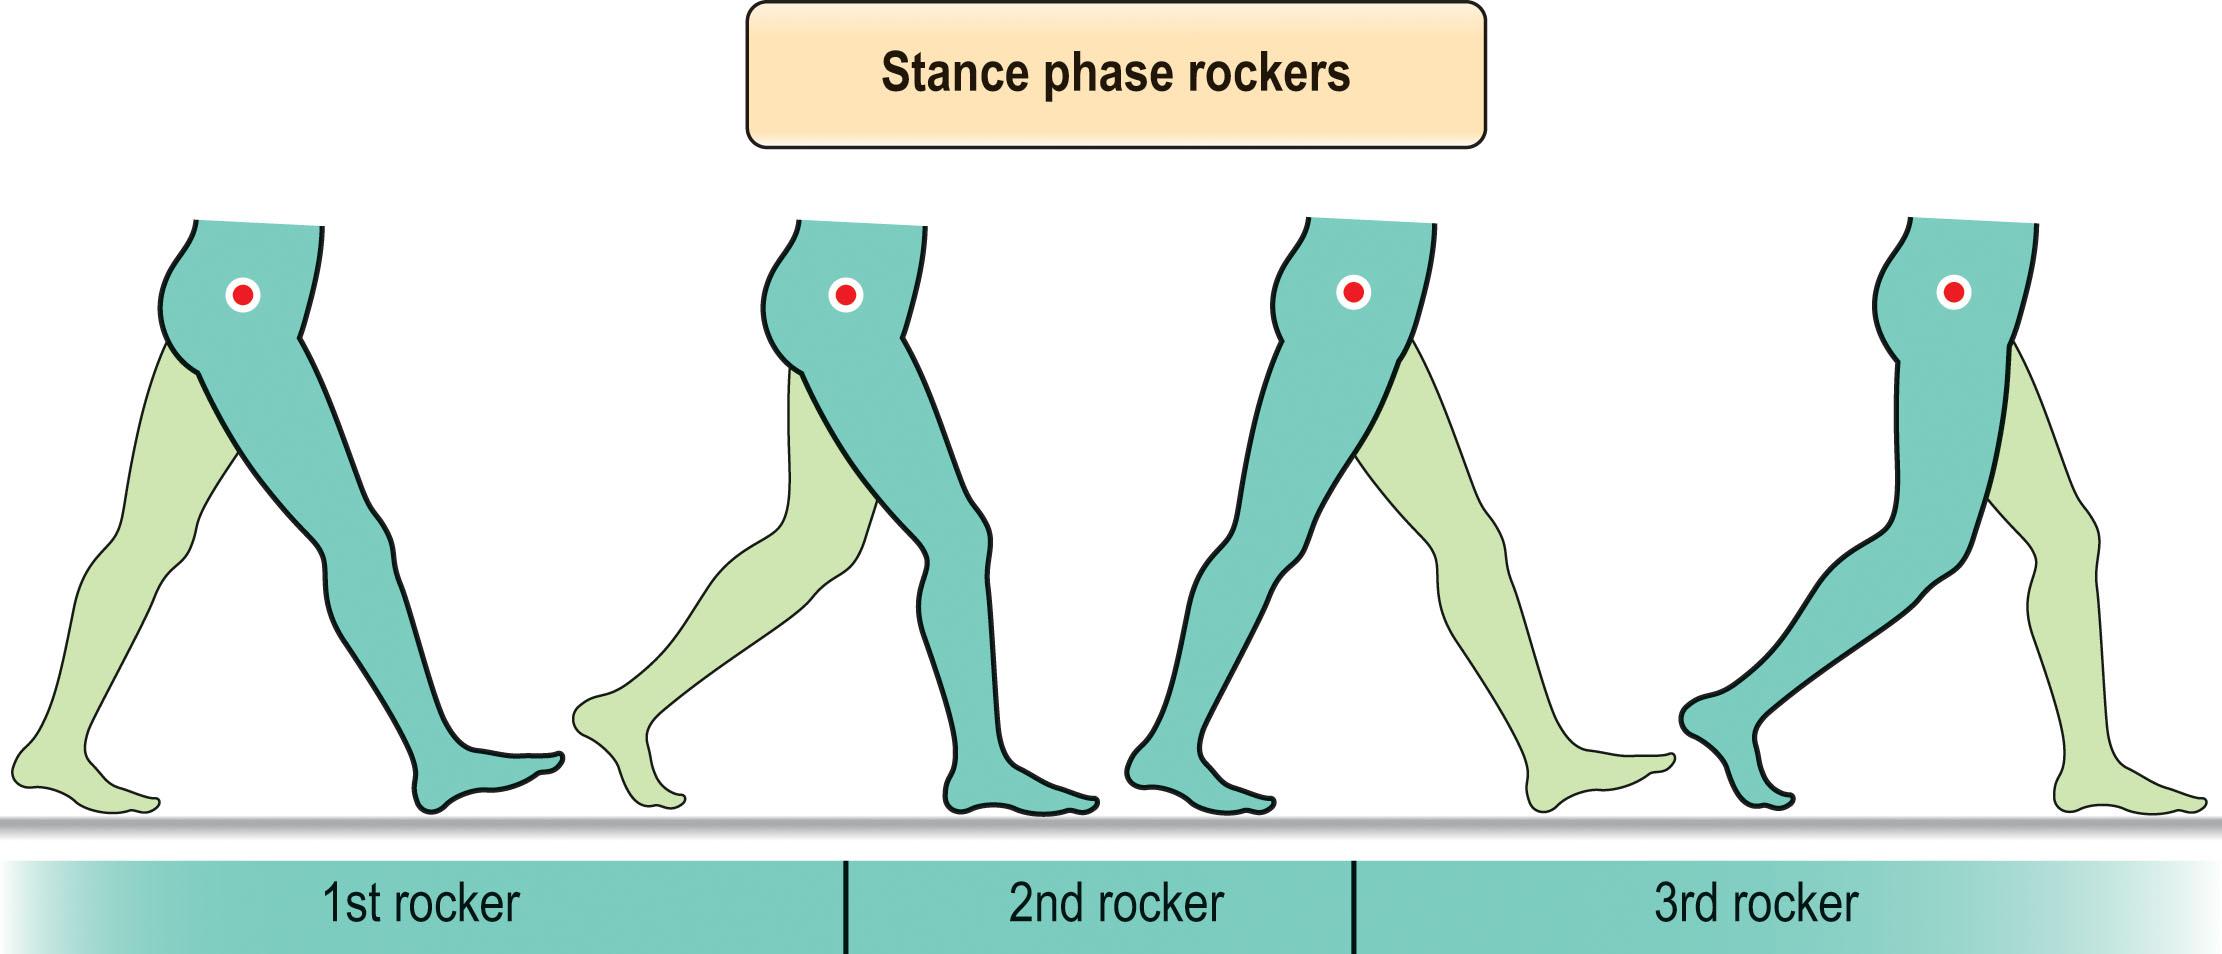 Figure 9.2.2, Perry 27 defined the actions of the rockers of the stance phase of a gait cycle. First rocker (heel rocker) is eccentric plantarflexion motion of the ankle during loading response. Second rocker (ankle rocker) is ankle dorsiflexion which precipitates forward progression of the body atop the stance phase foot. Third rocker (toe rocker) is dorsiflexion at the level of the metatarsophalangeal joints for terminal stance phase push-off.